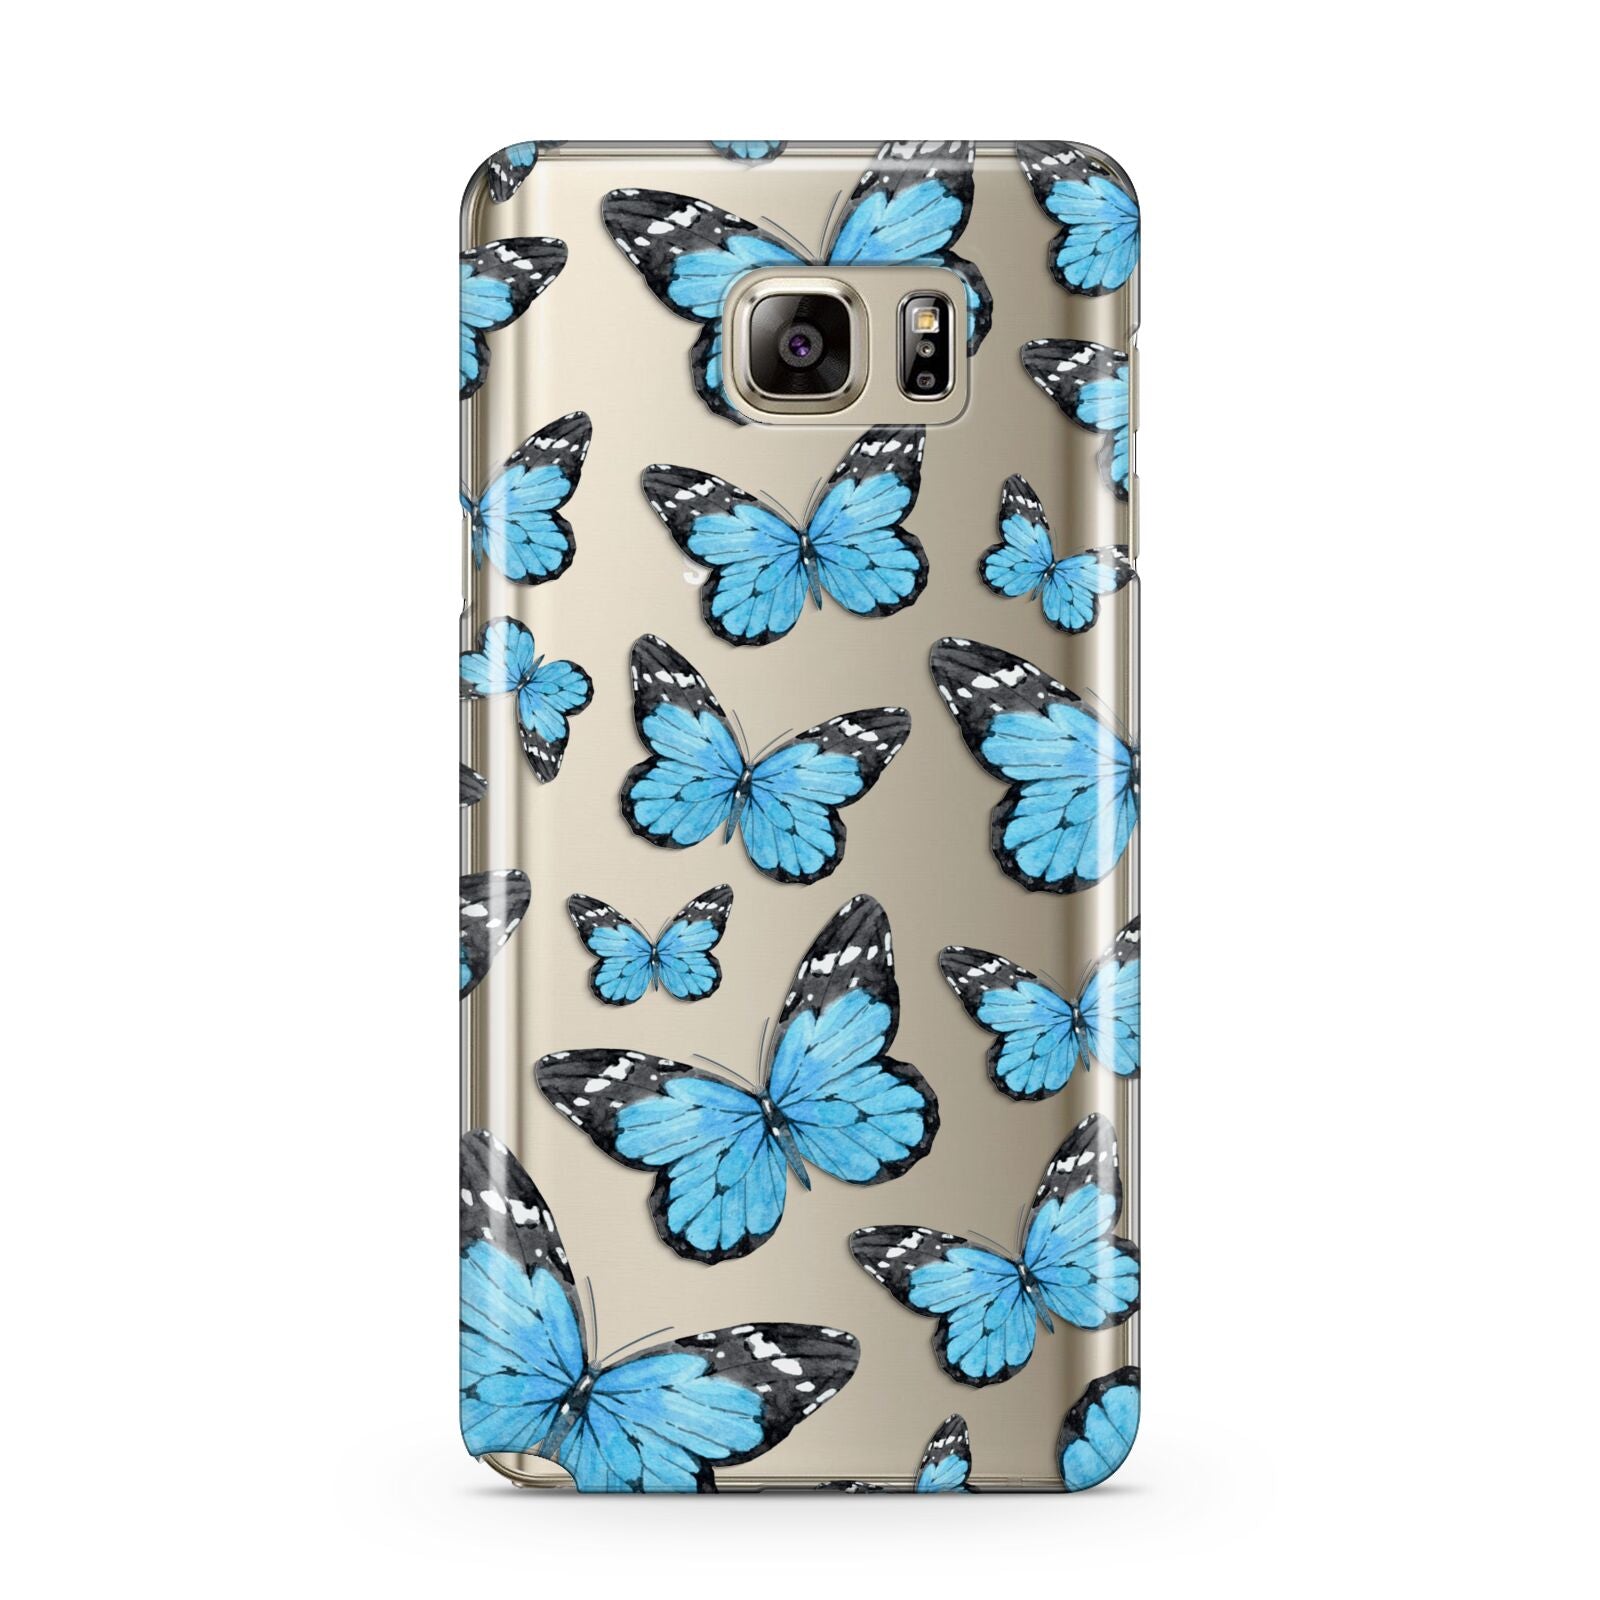 Blue Butterfly Samsung Galaxy Note 5 Case